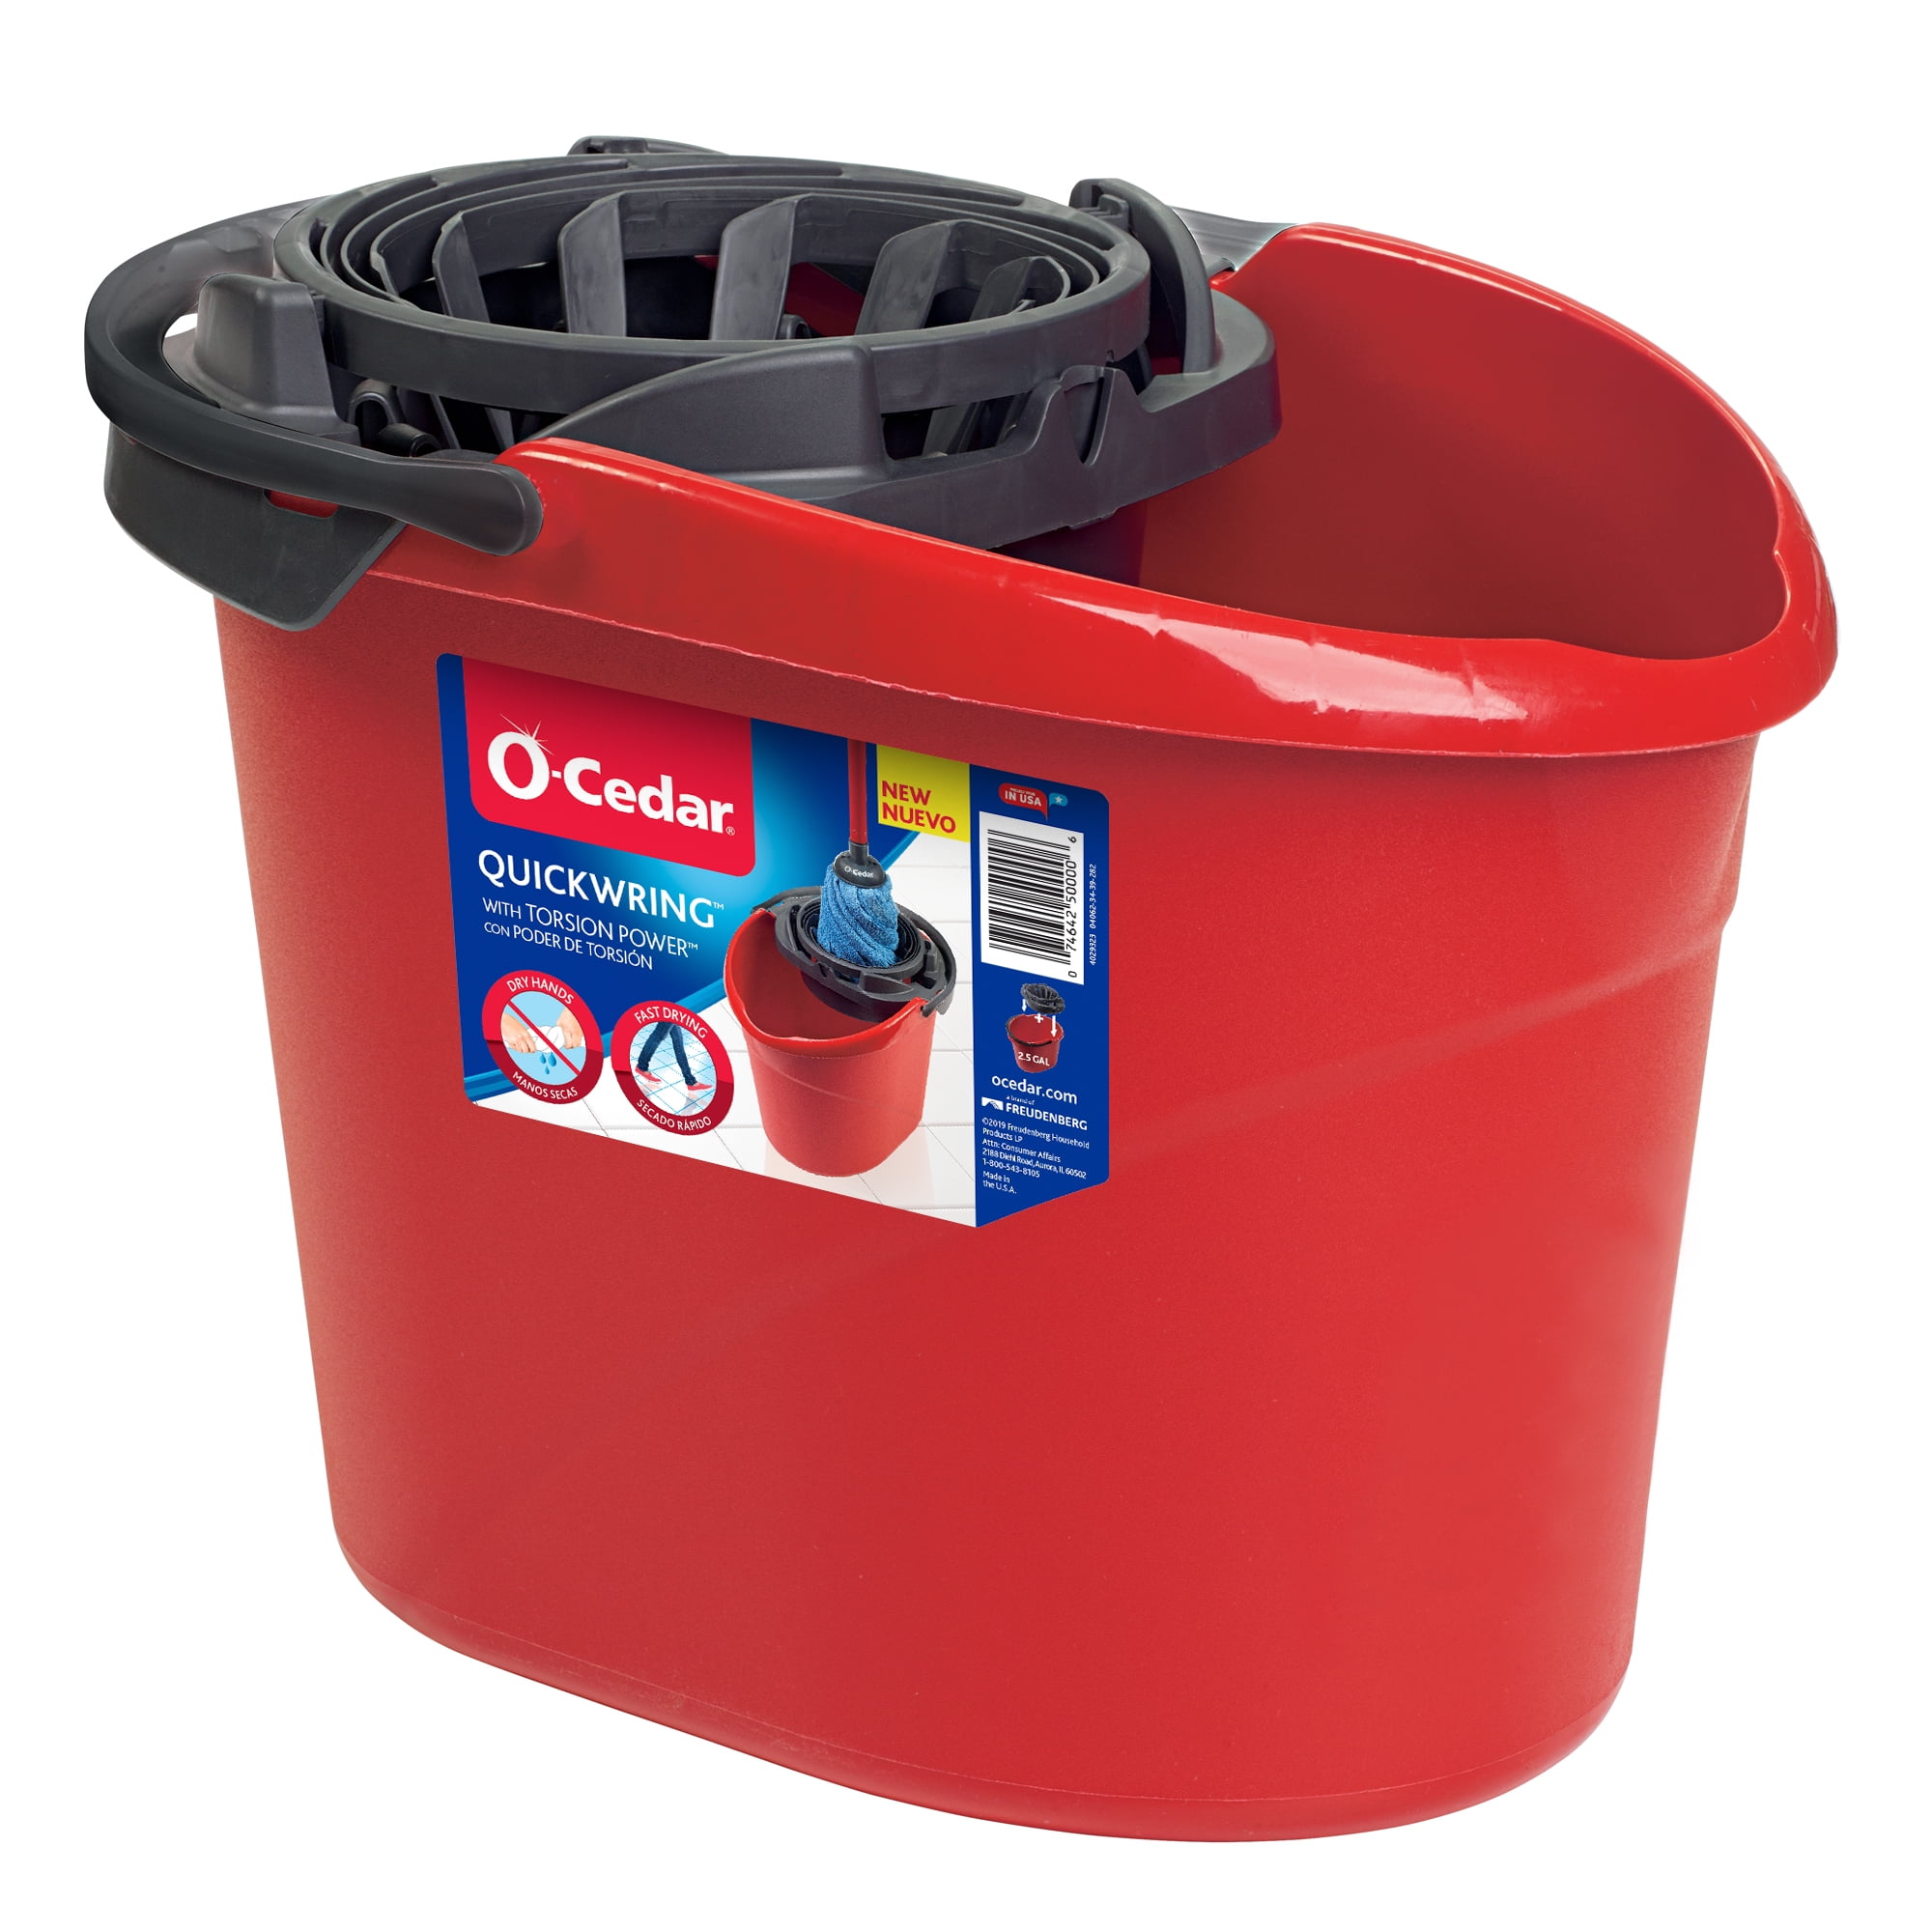 O-Cedar QuickWring Cloth Mop & Bucket System with 1 Extra Refill